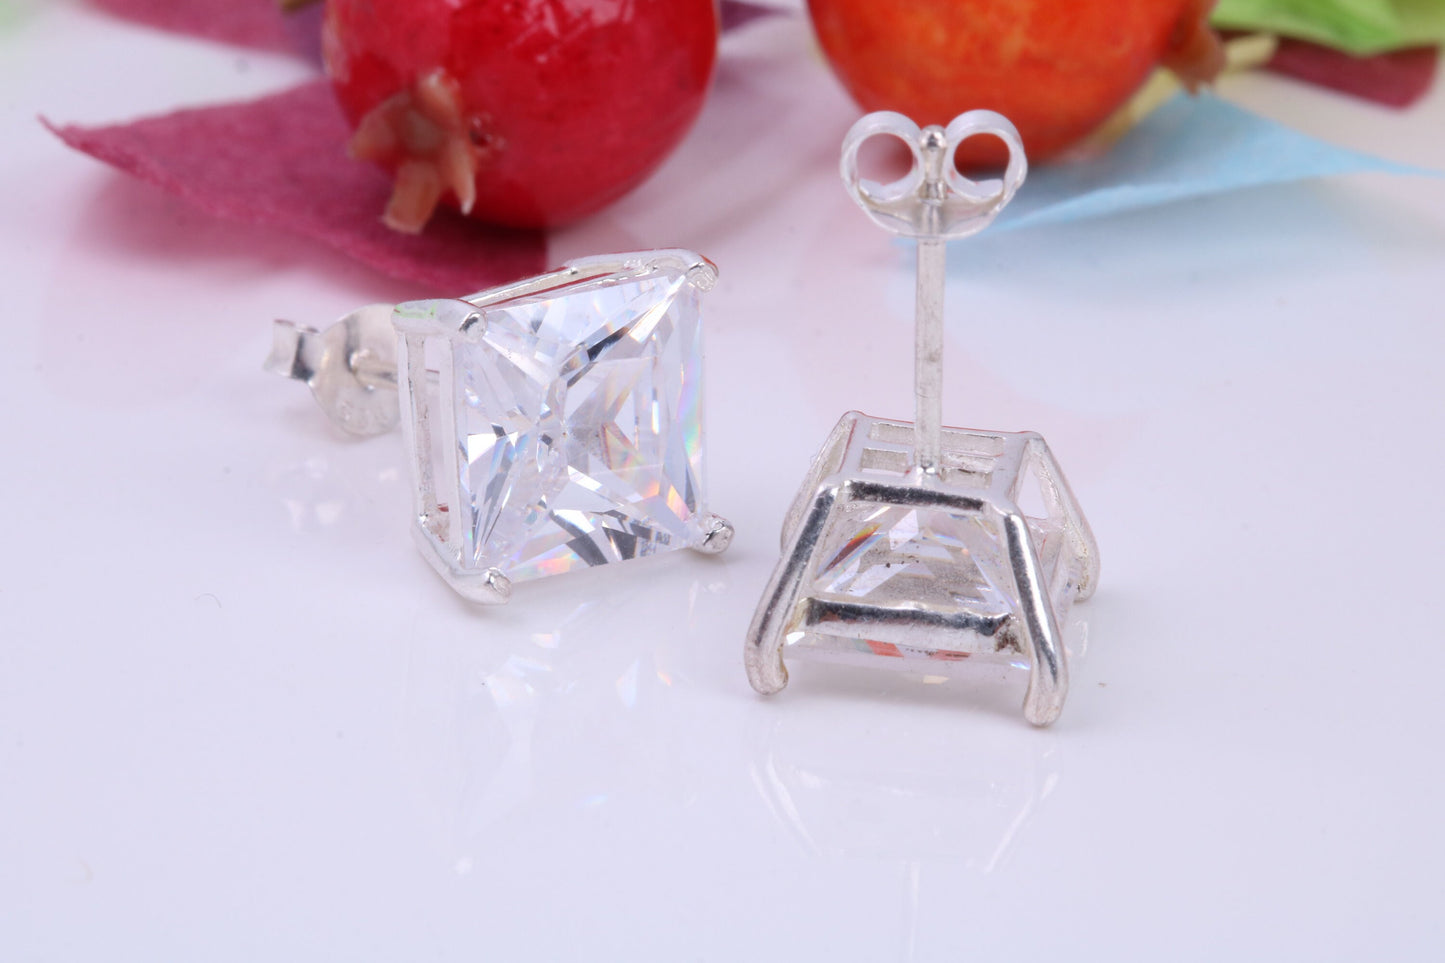 10 mm Square Cubic Zirconia set Stud Earrings, Made from Solid Cast Sterling Silver, Ideal for Gents